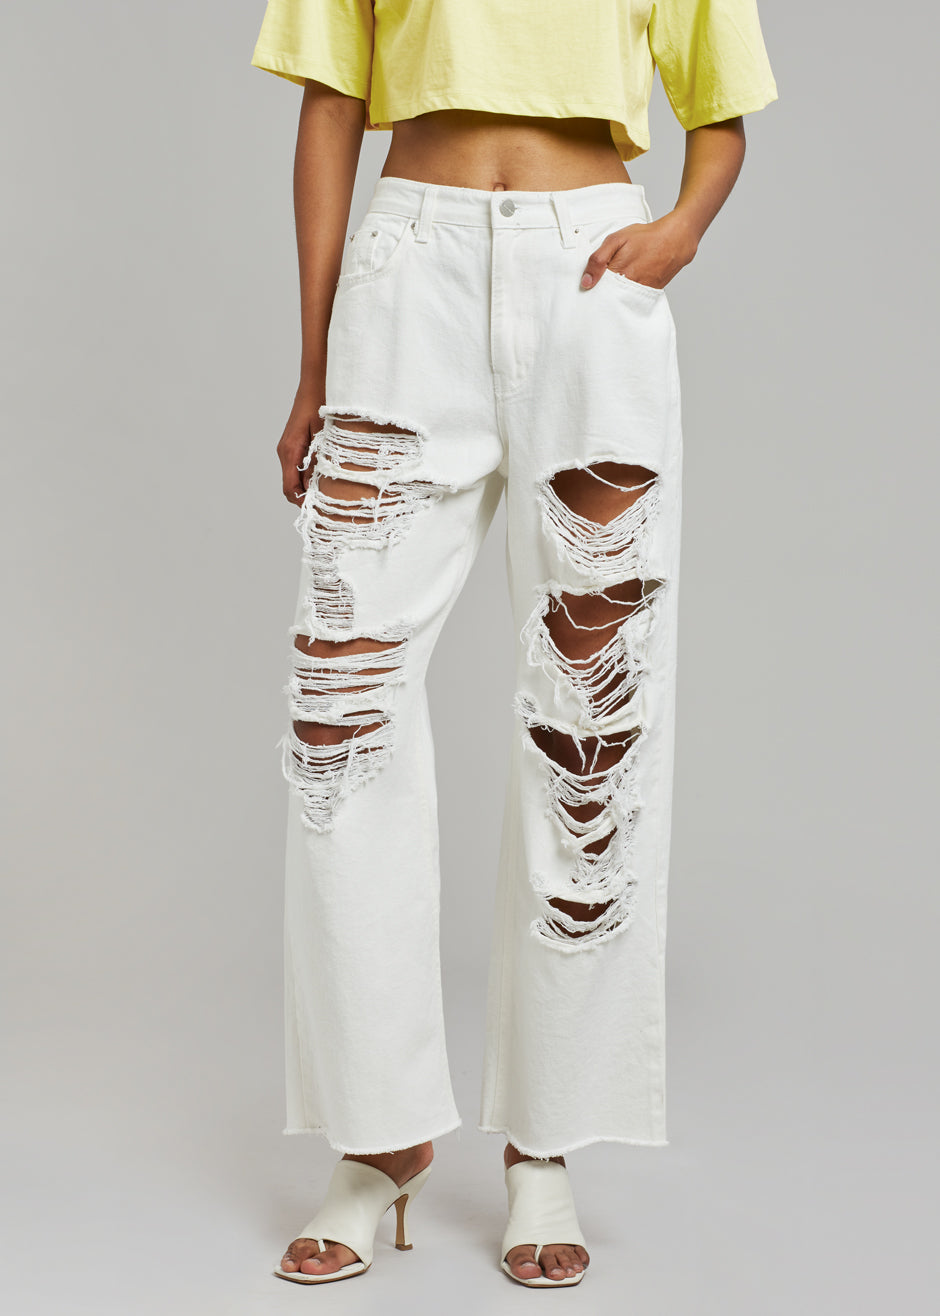 Tory Ripped Jeans - White - 3